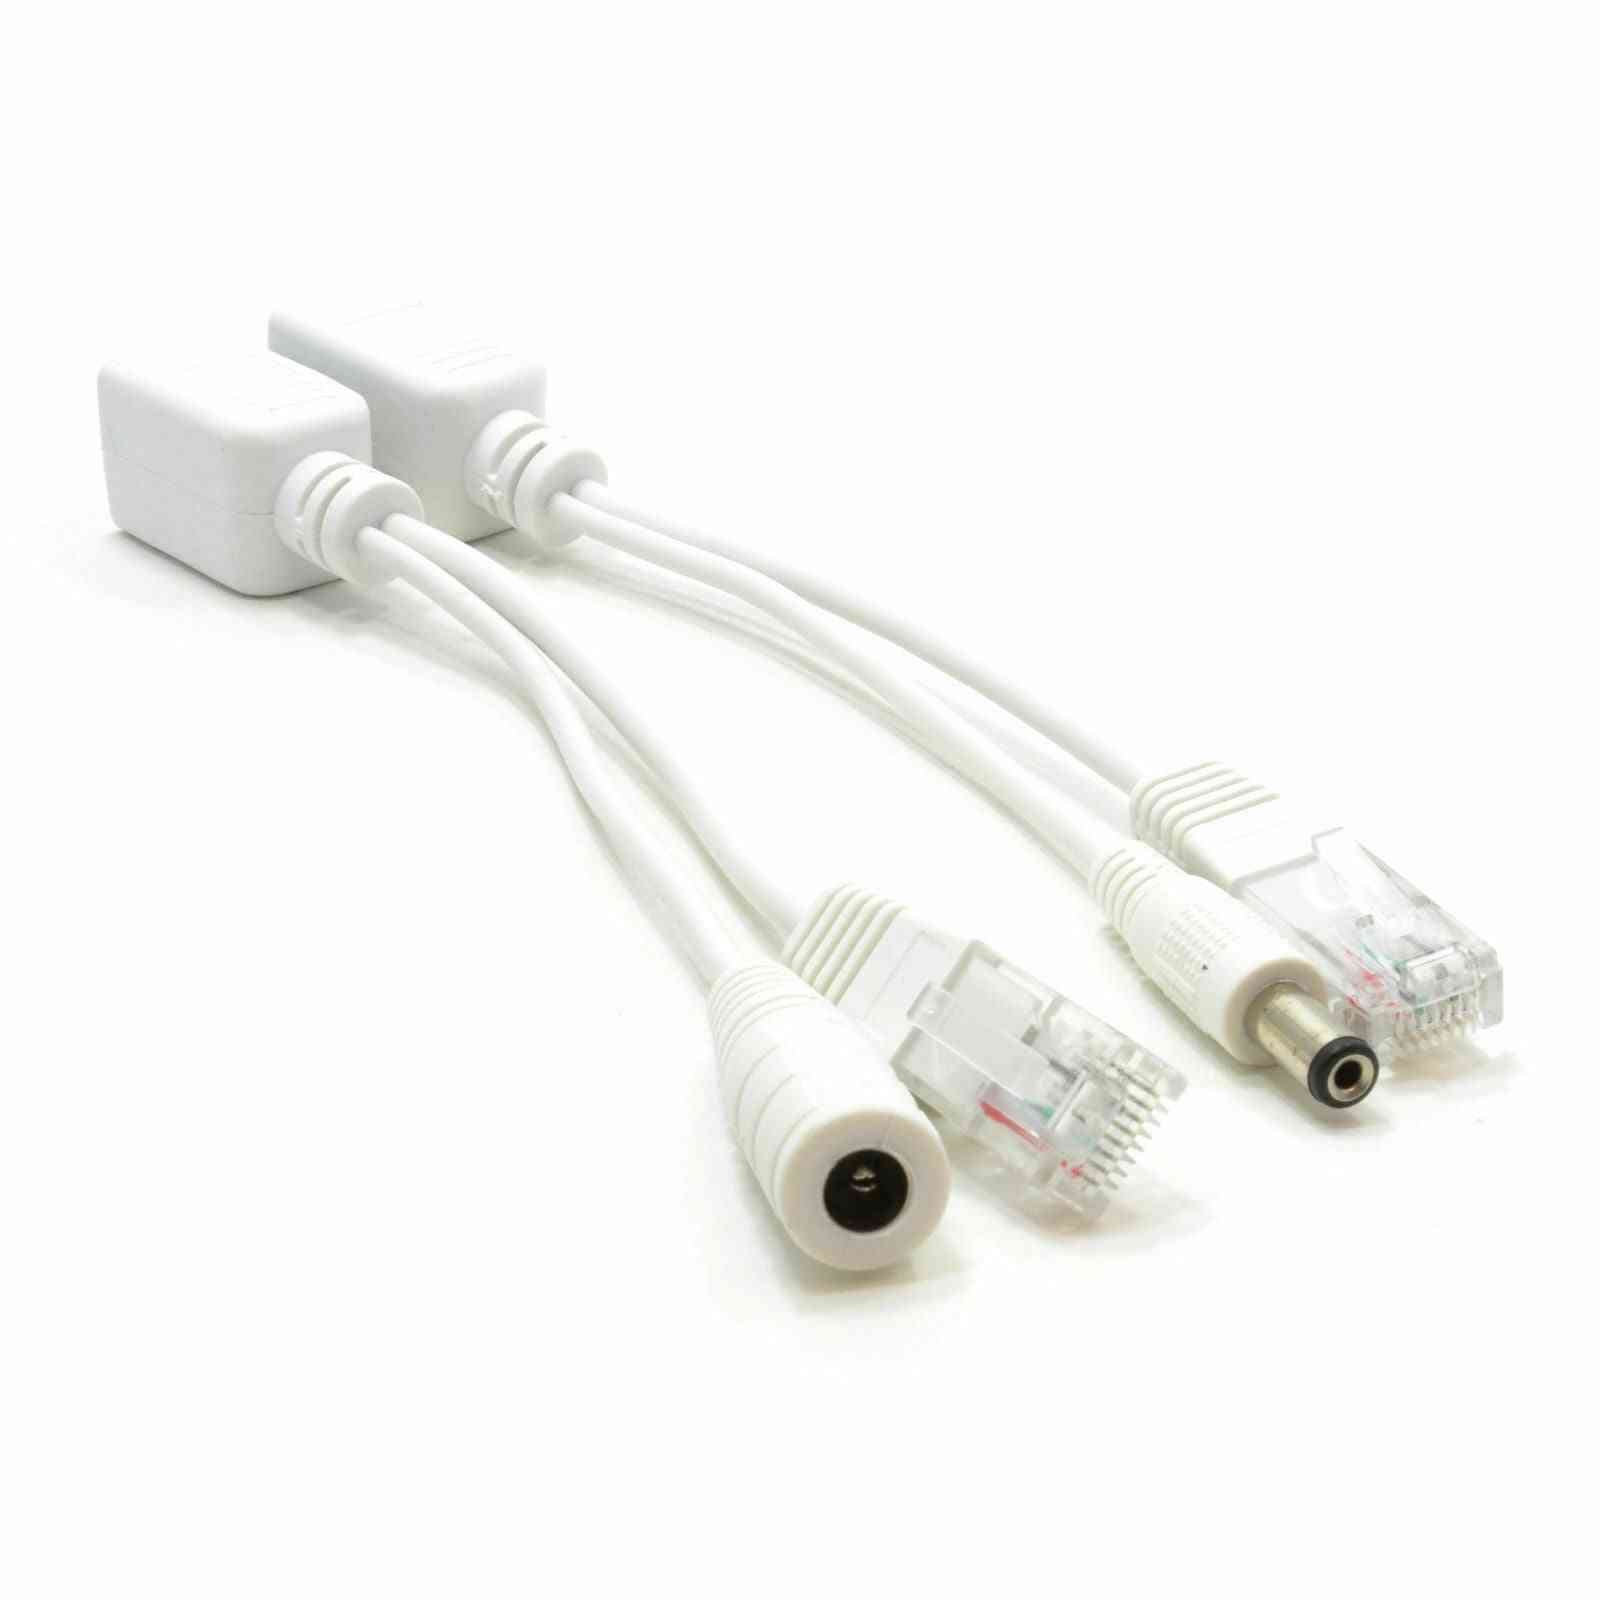 Ip Camera Poe Rj45 Cable Power Over Ethernet Adapter Injector Splitter